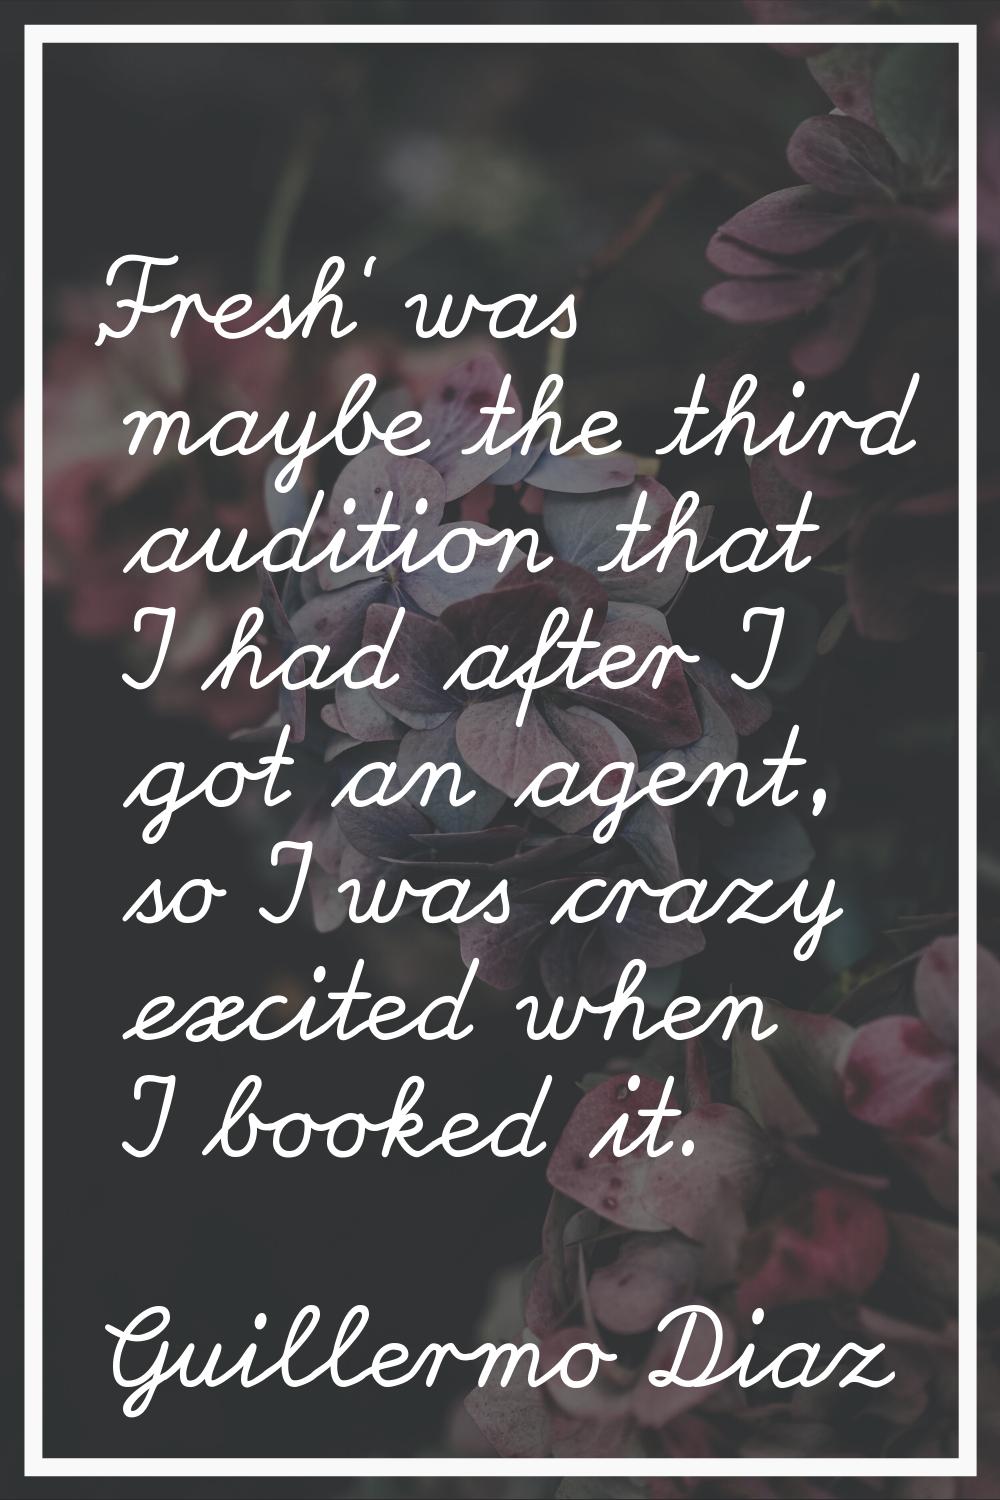 'Fresh' was maybe the third audition that I had after I got an agent, so I was crazy excited when I